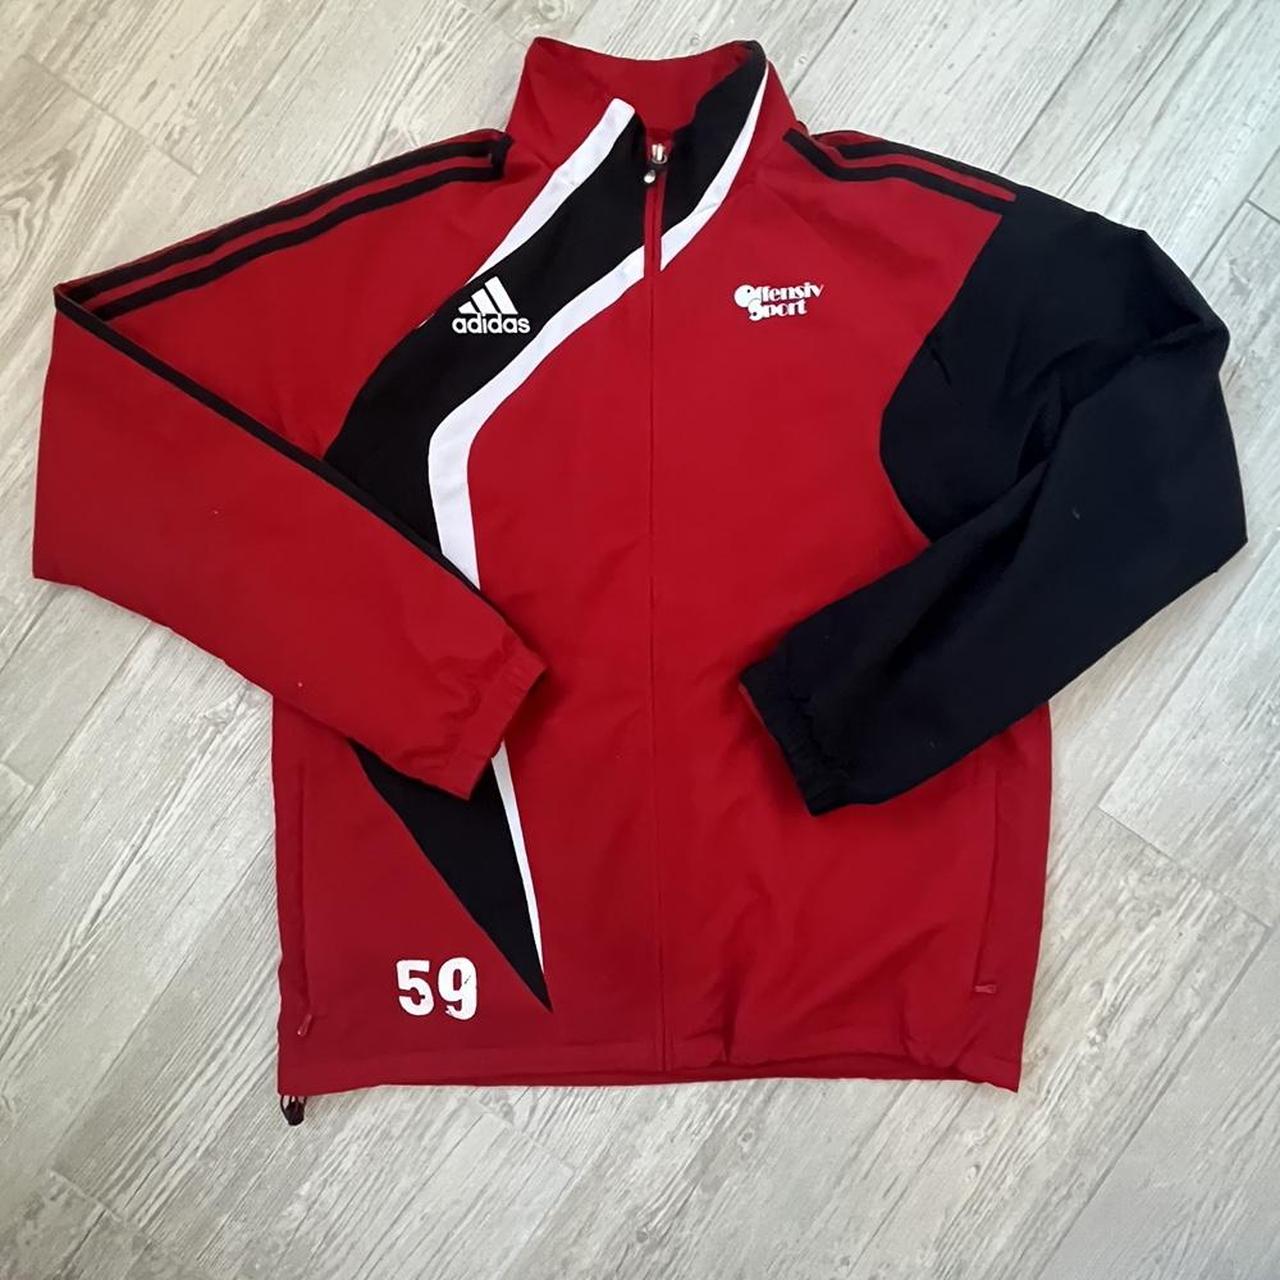 ADIDAS WINDBREAKER i’m a size sm and it’s the... - Depop